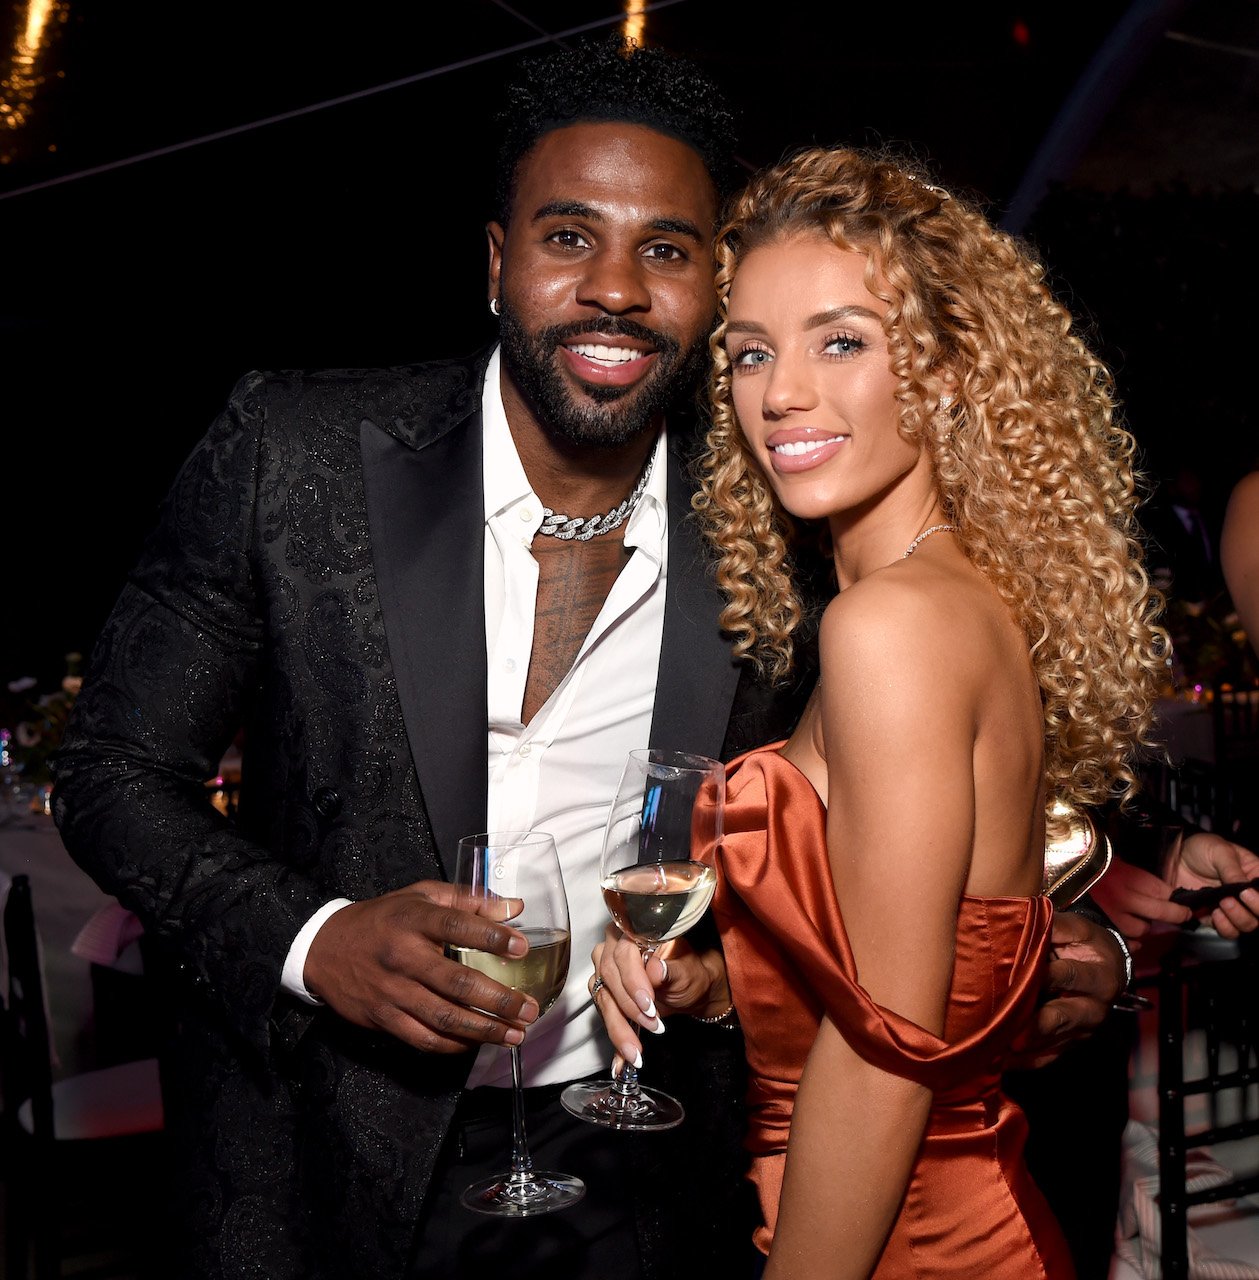 Jason Derulo and Jena Frumes pose for photo; Frumes recently blasted Derulo on Instagram